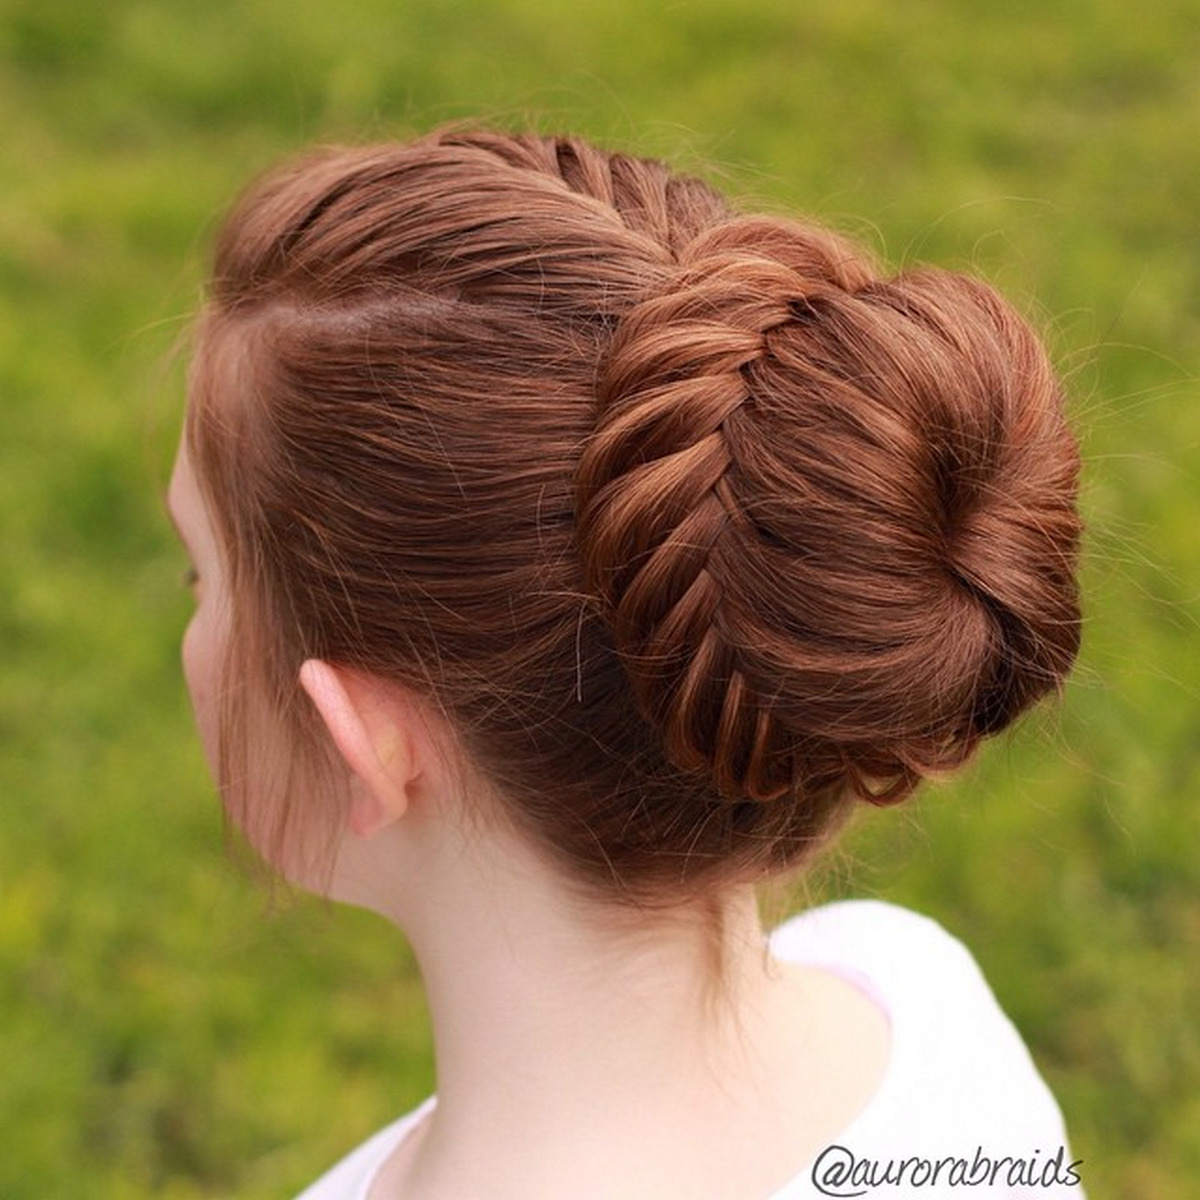 Lace Fishtail Bun With a French Fishtail